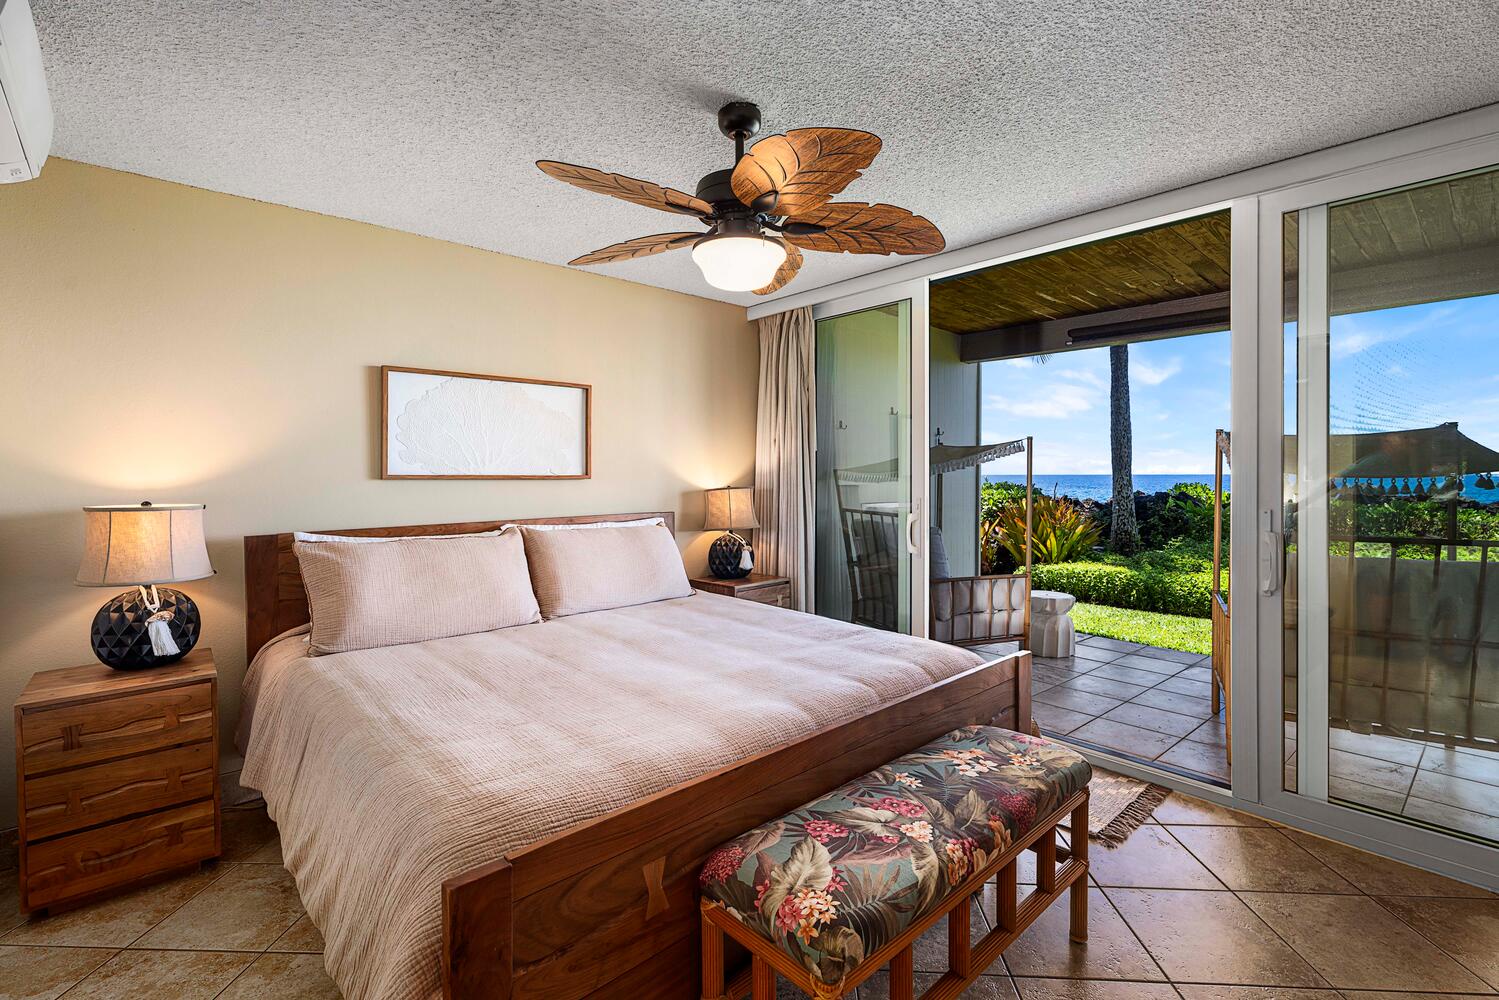 Kailua Kona Vacation Rentals, Keauhou Kona Surf & Racquet 1104 - Plush king bed for the primary suite with access to the lanai